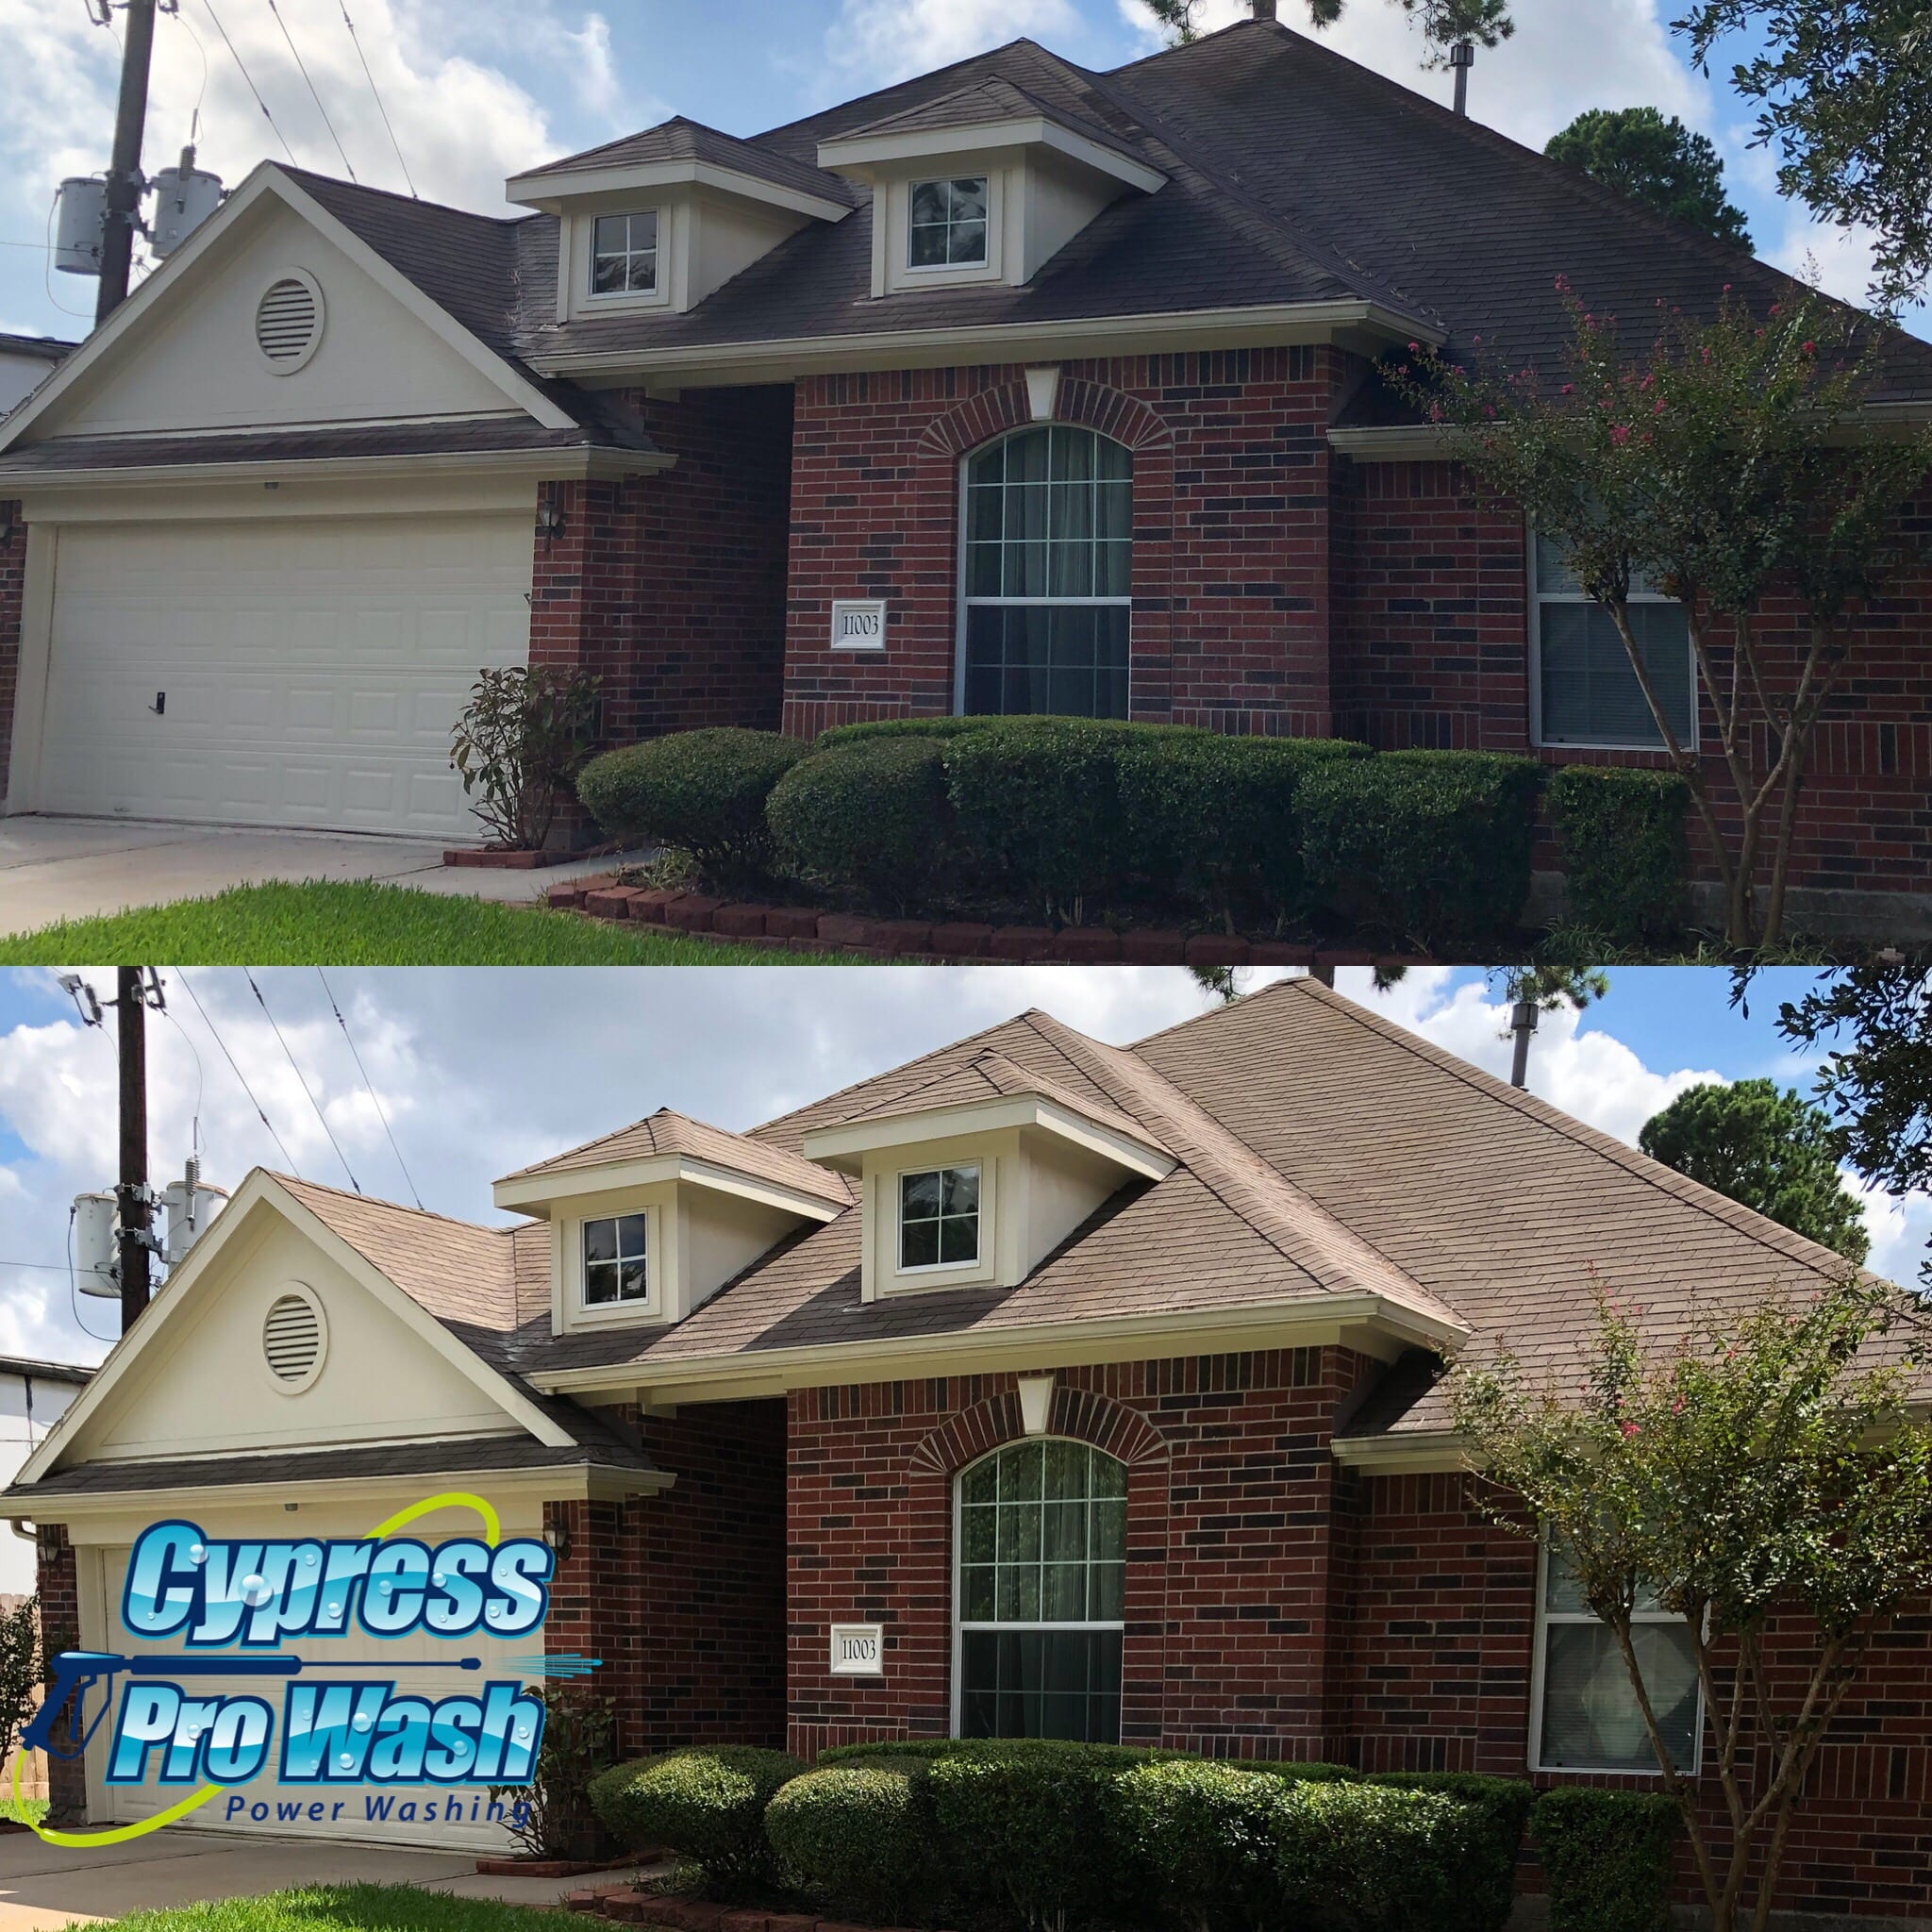 ROOF CLEANING Your roof keeps your home comfortable and protects your family from the elements. That said, taking care of it is essential. To improve the look of your home and give it the protection it deserves, contact Cypress Pro Wash today for unbeatable roof cleaning solutions! IMPORTANCE OF A CLEAN ROOF Not only does a clean roof look incredible, but it can also increase the value of your home, boost curb appeal, and so much more! Here at Cypress Pro Wash, we’re the roof cleaning specialists! We’re happy to provide roof cleaning services to residents in Cypress, Katy, Spring, and the entire surrounding area. As the Texas weather can be extreme, tons of dirt, leaves, and other debris can accumulate on your roof. This can cause your roof to wear down faster, which may lead to costly repairs or even a roof replacement. A clean roof can also substantially boost your home’s curb appeal. While this can make your home look fantastic, it can also increase the value of your property. Protect your home and protect your investment by calling us today for roof cleaning services!